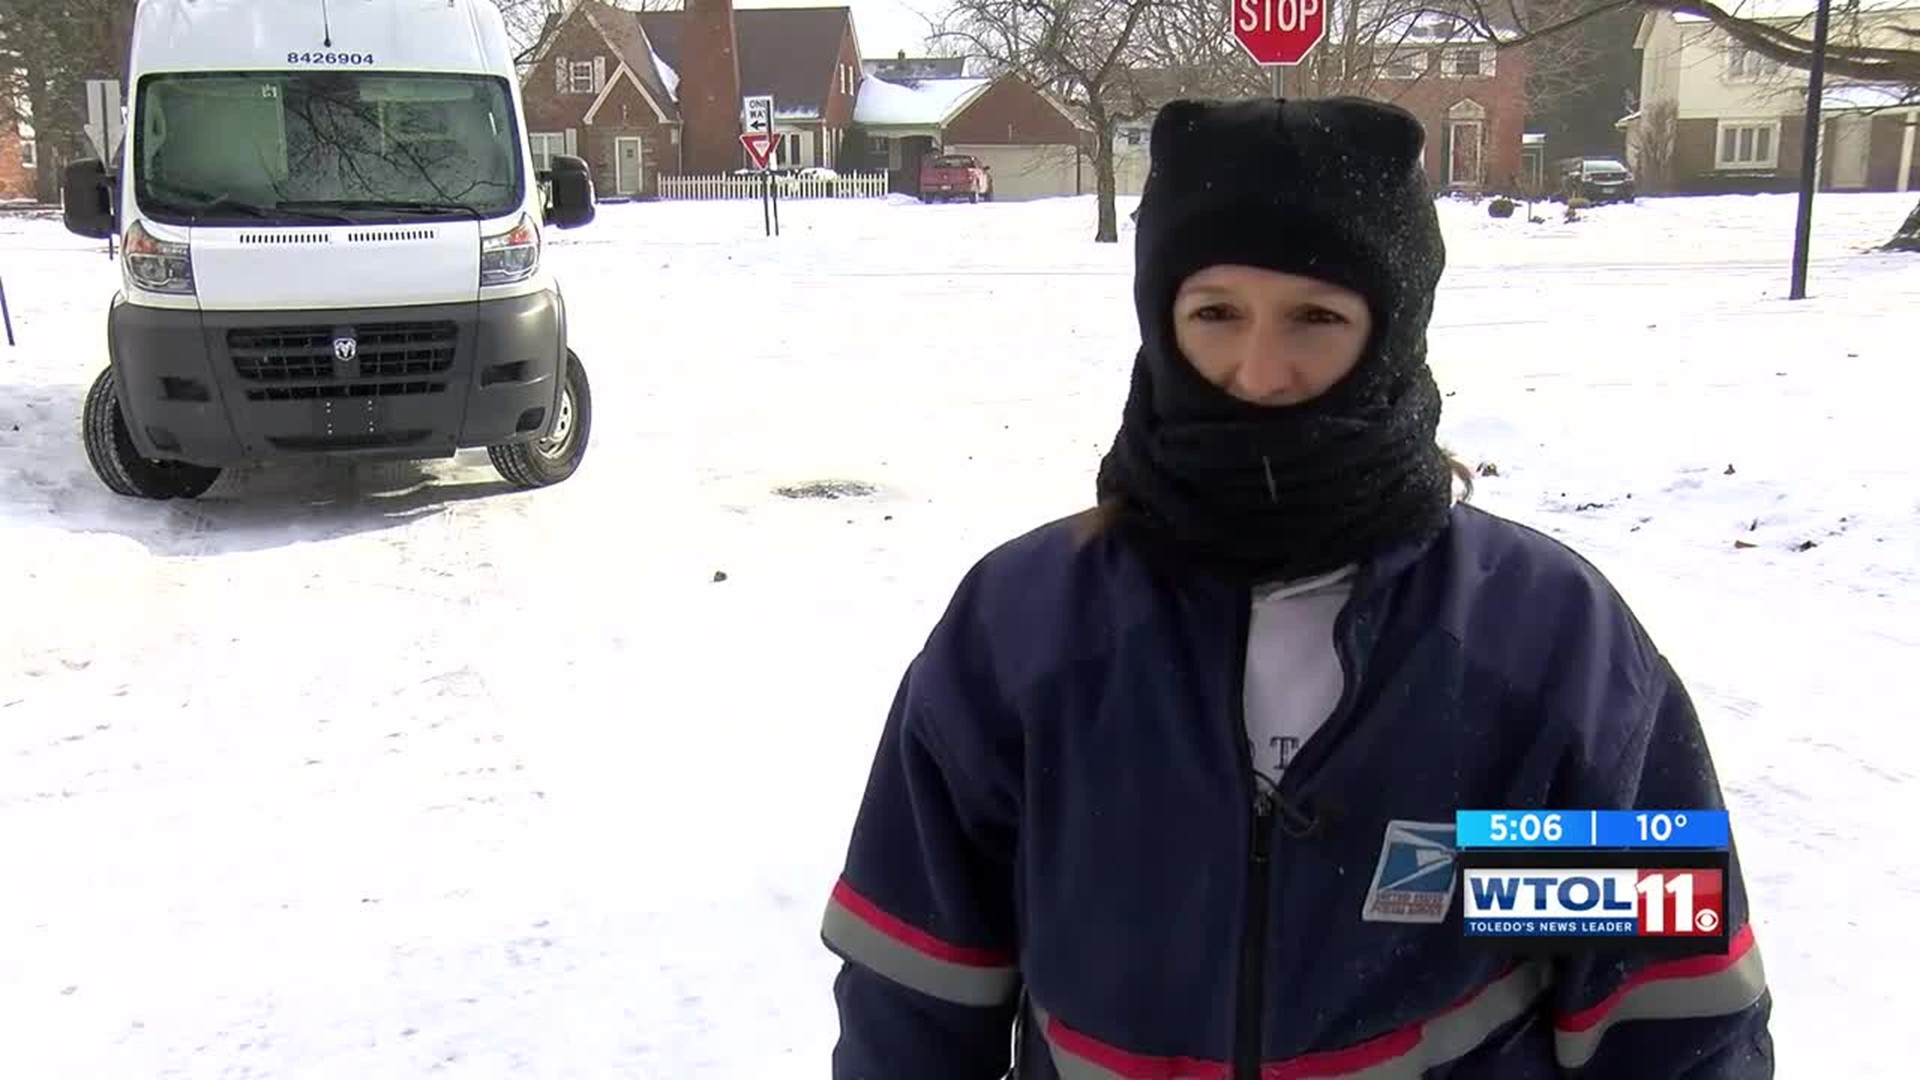 Mail carrier furious that USPS is making employees work during frigid weather